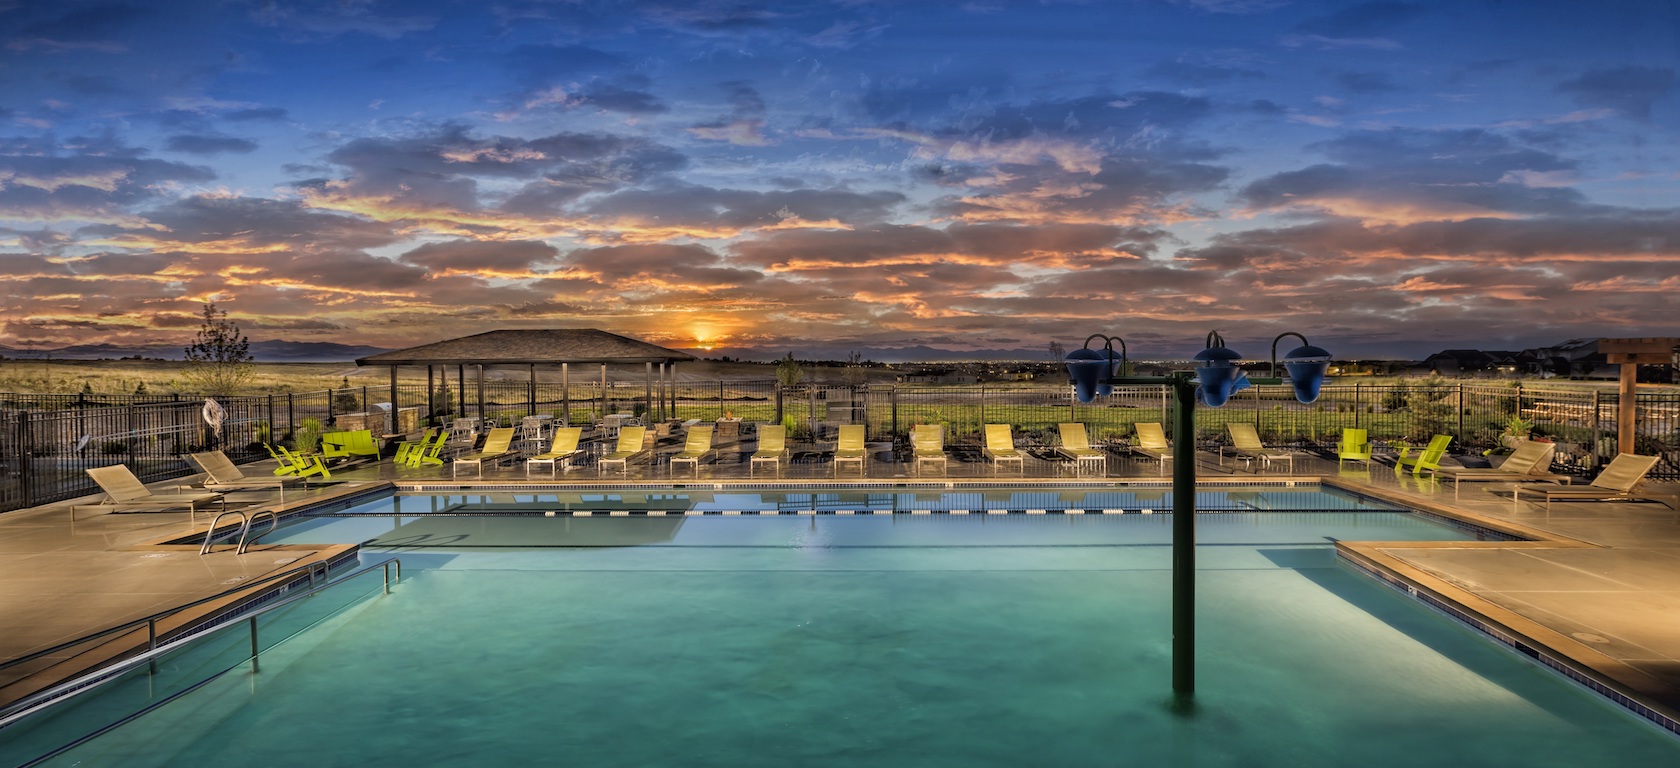 Pool overlooking a sunset the Toll Brothers at Inspiration community.